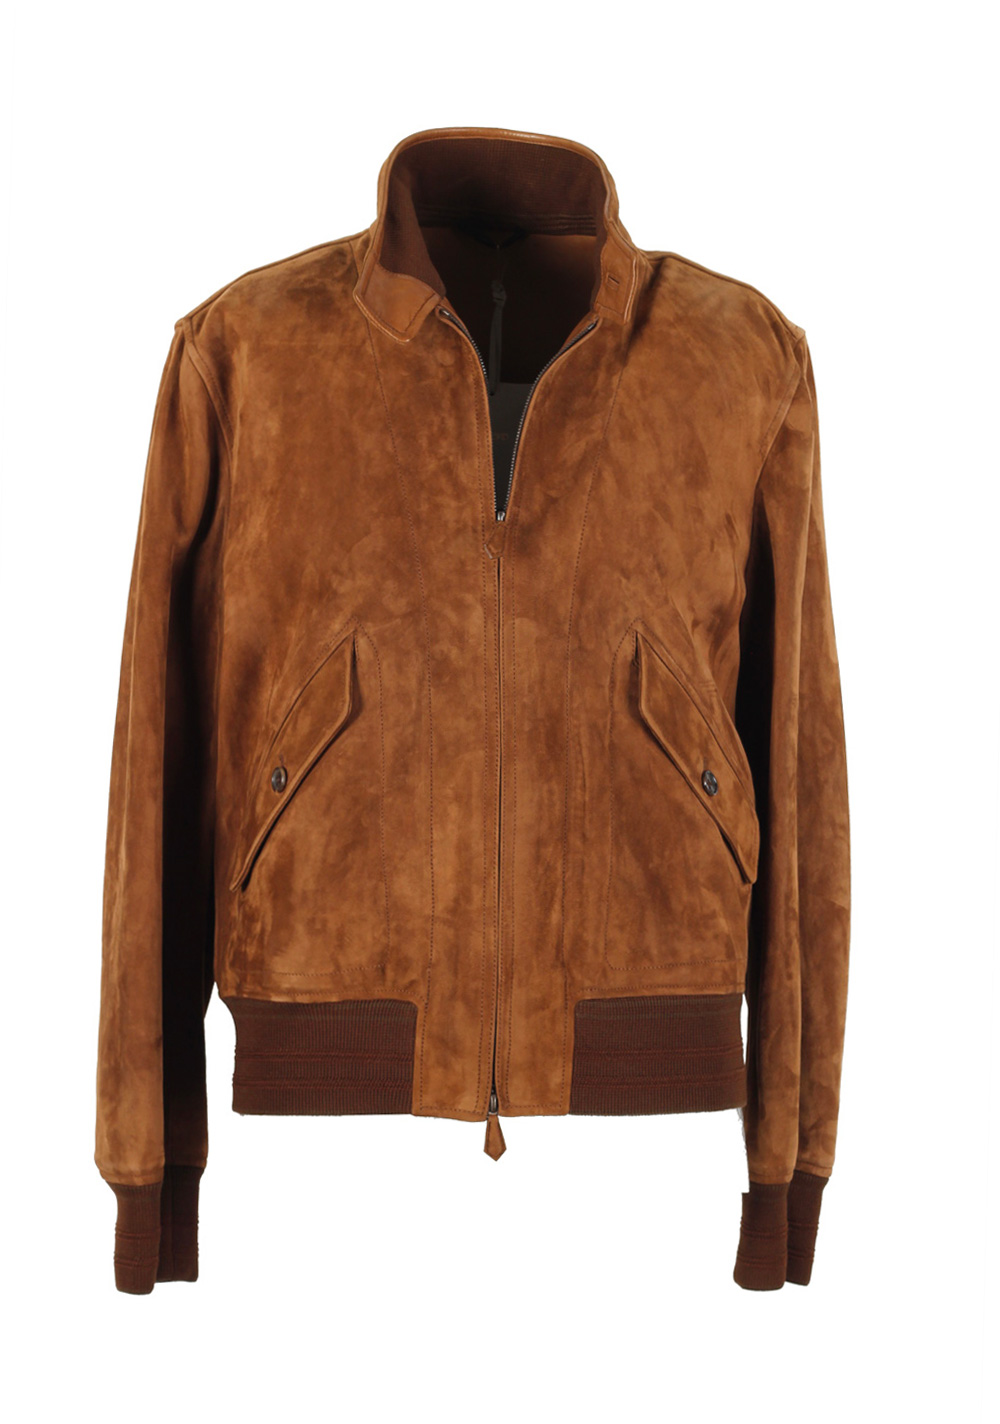 TOM FORD Leather Lambskin Suede Jacket Coat Size 50 / 40R U.S ...